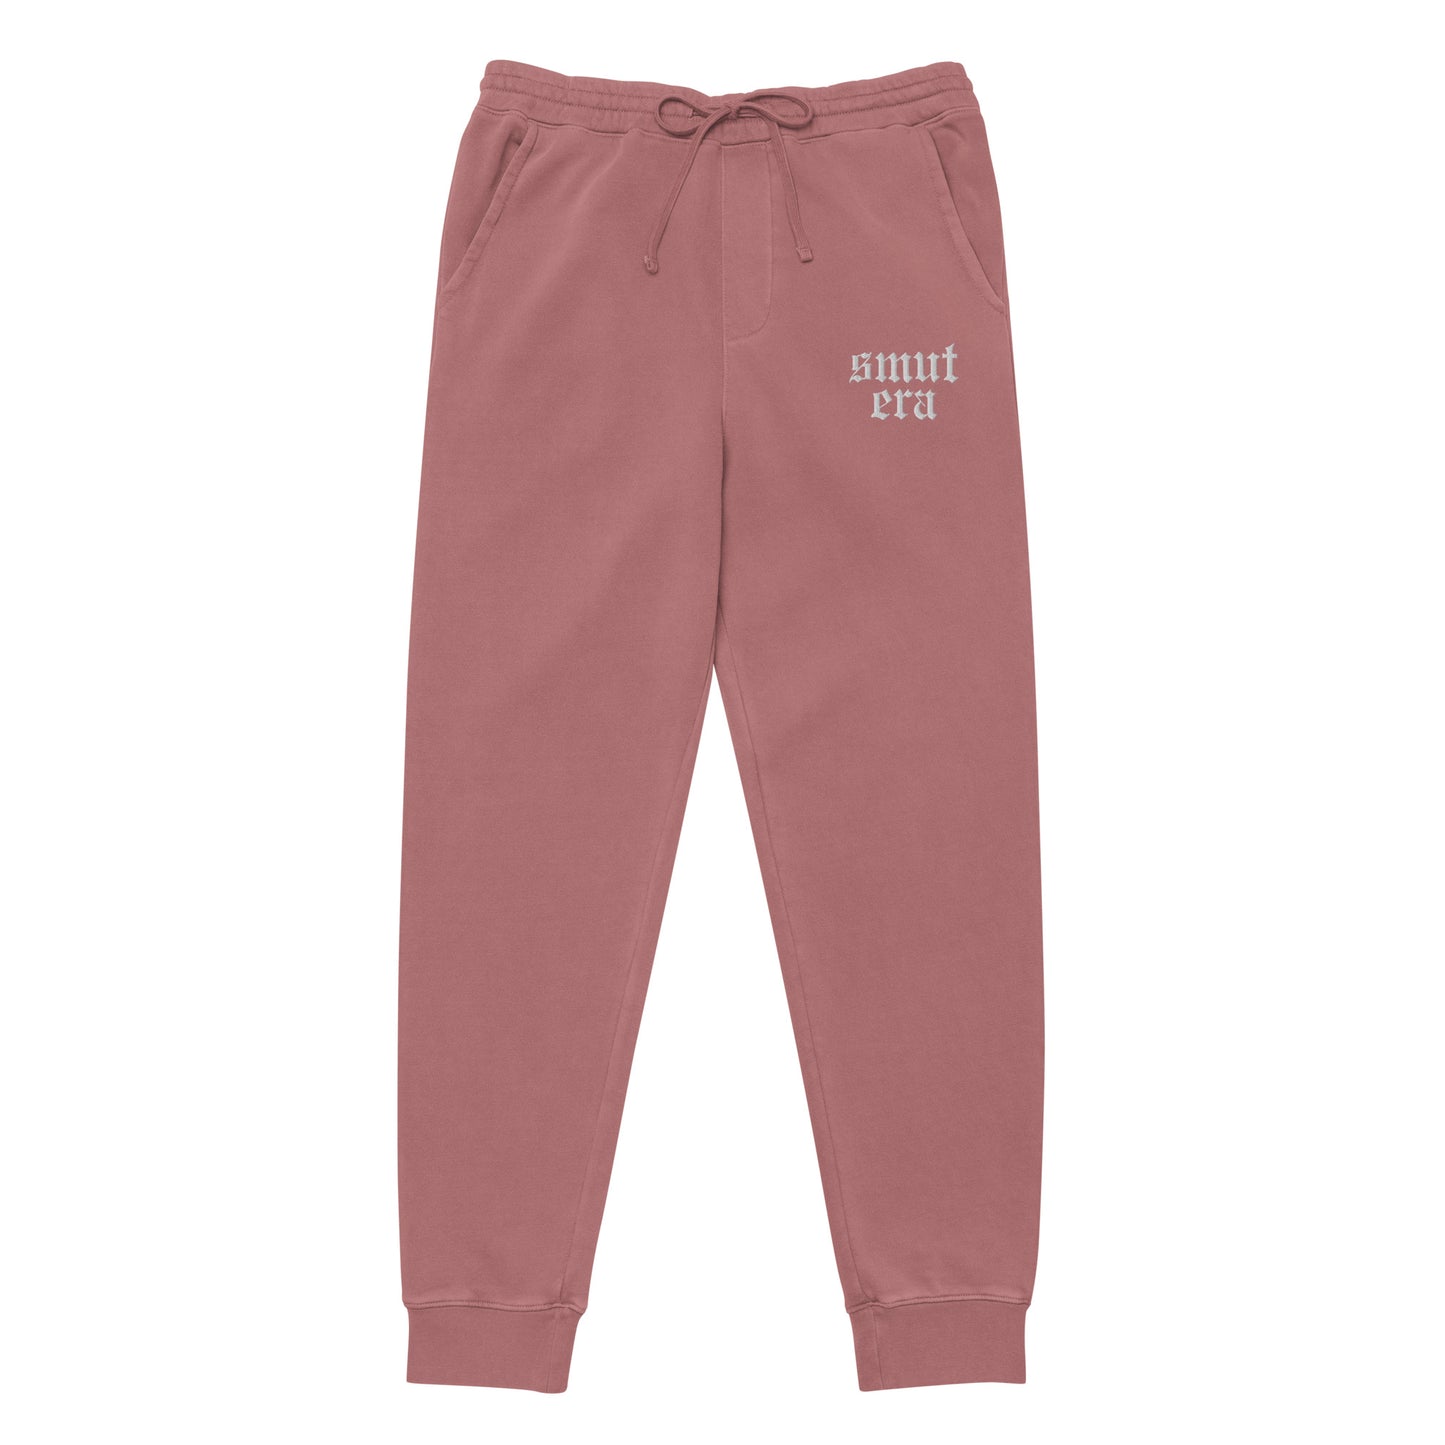 smut era embroidered joggers